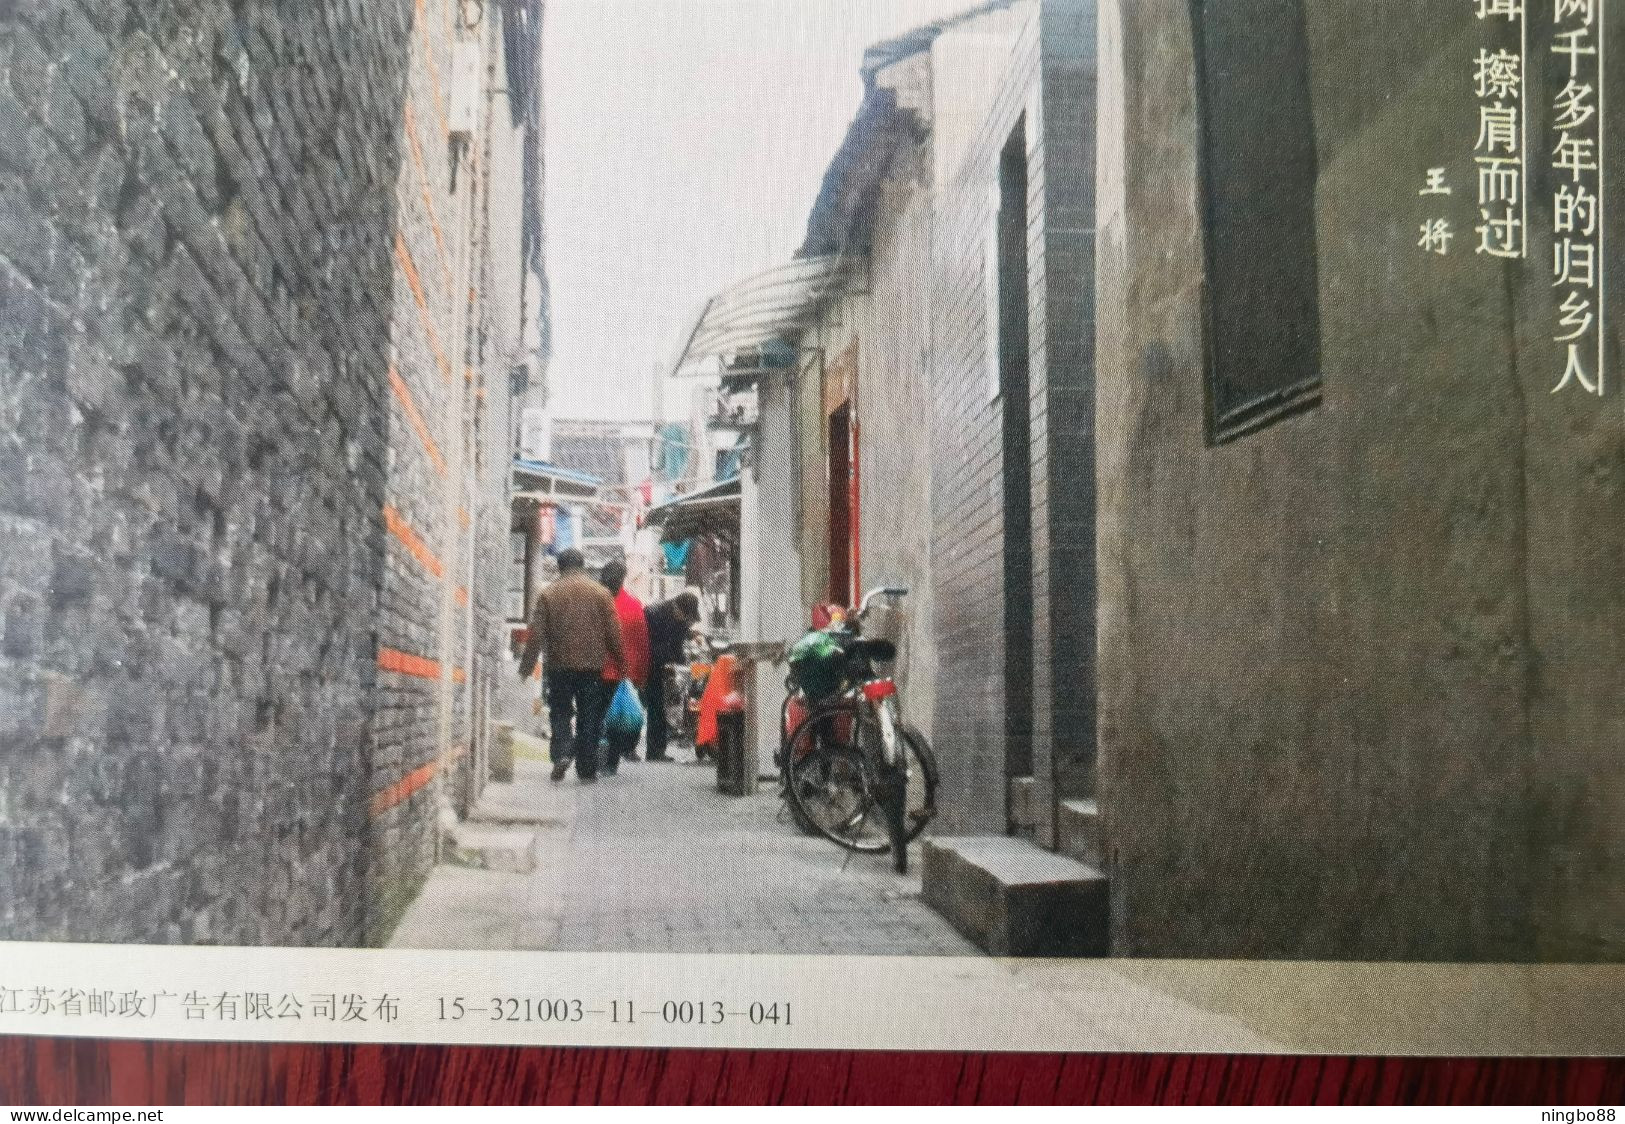 Street Bicycle Parking,bike,China 2015 Grand Canal Dongguan Ancient Ferry UNESCO World Heritage Pre-stamped Card - Wielrennen